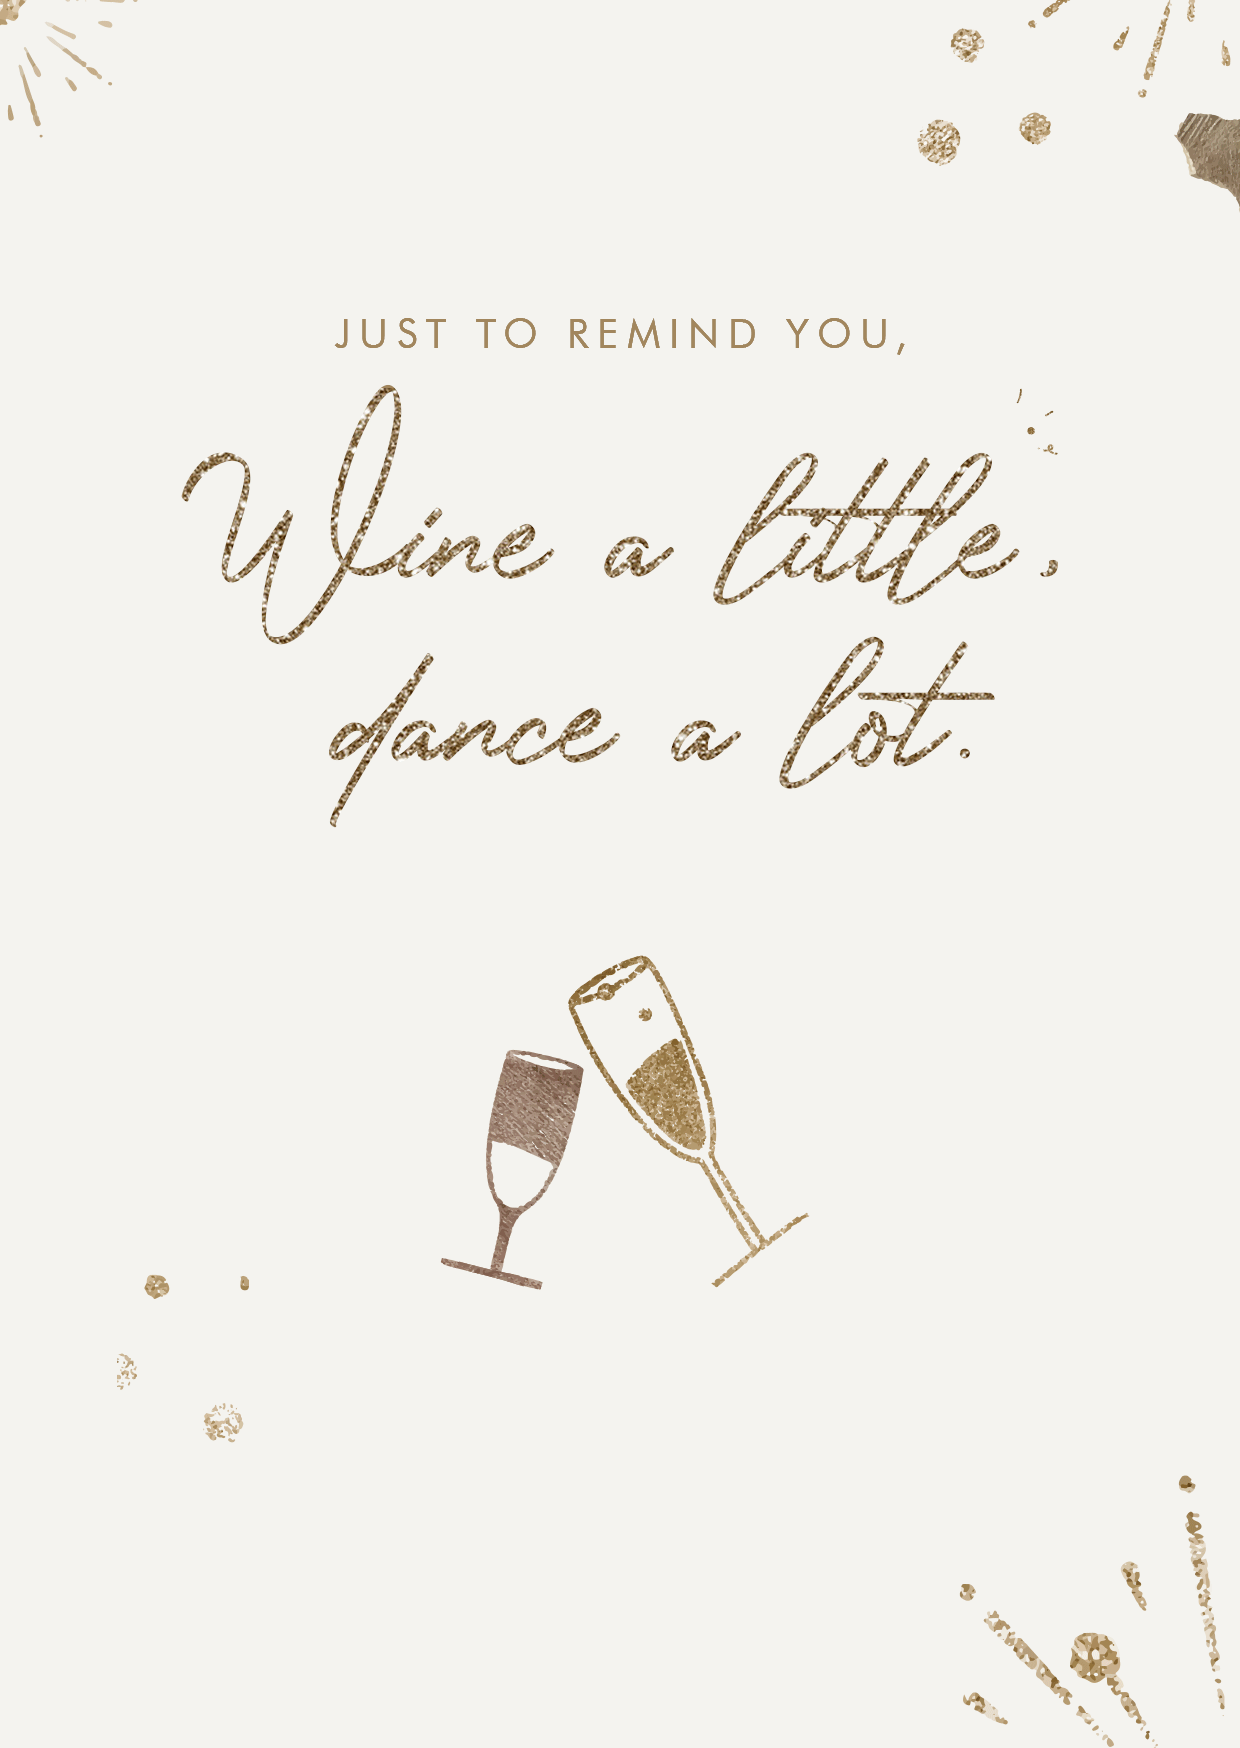 Just to remind YOU: Wine a little, dance a lot.